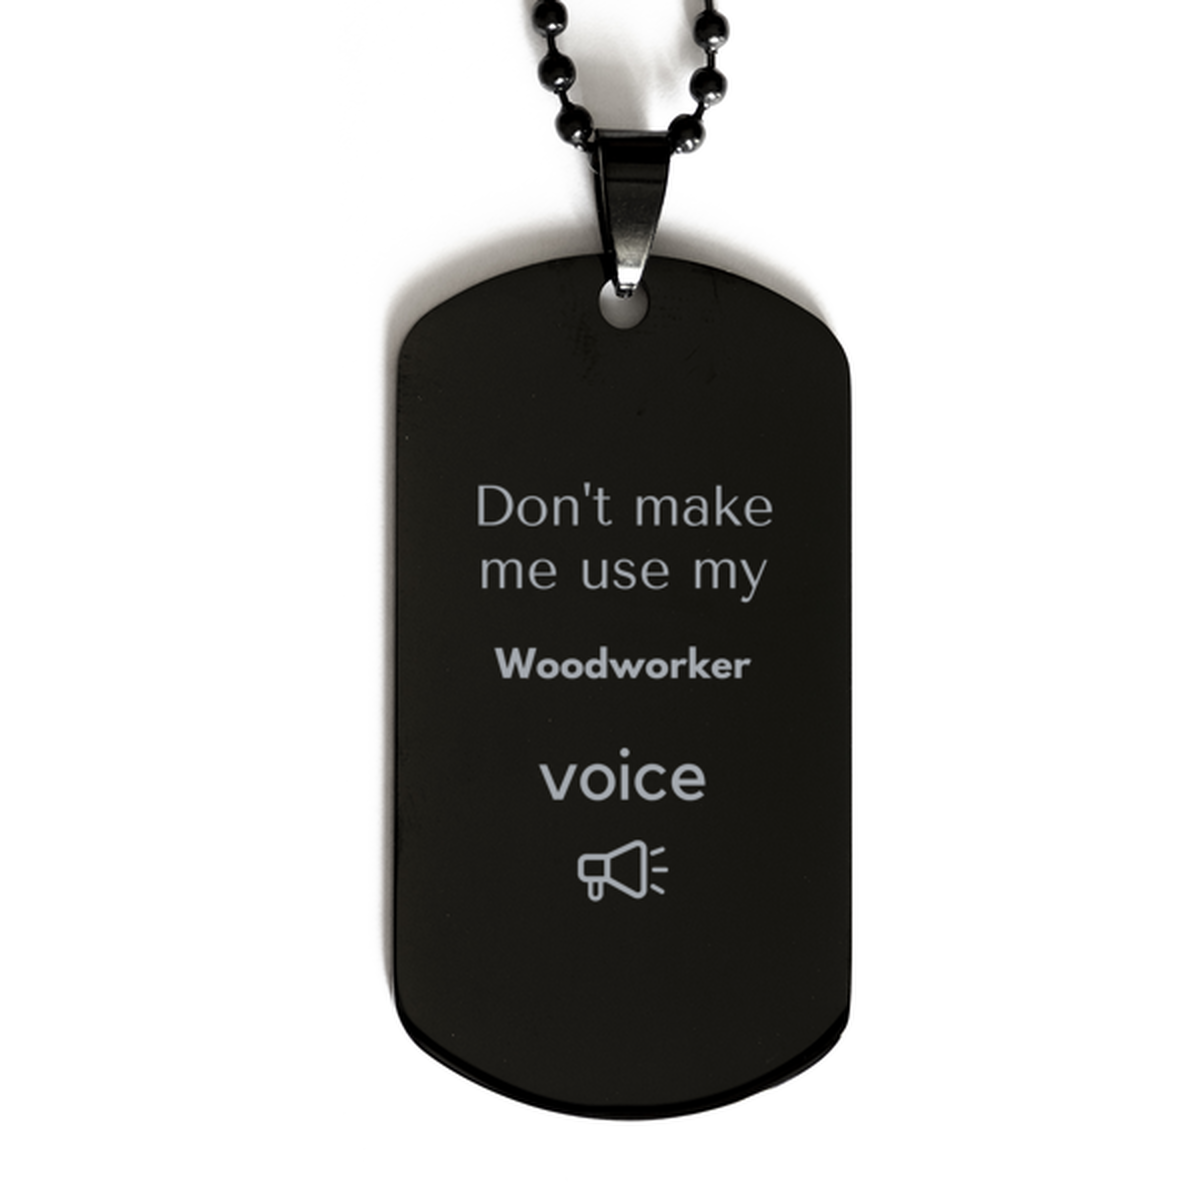 Don't make me use my Woodworker voice, Sarcasm Woodworker Gifts, Christmas Woodworker Black Dog Tag Birthday Unique Gifts For Woodworker Coworkers, Men, Women, Colleague, Friends